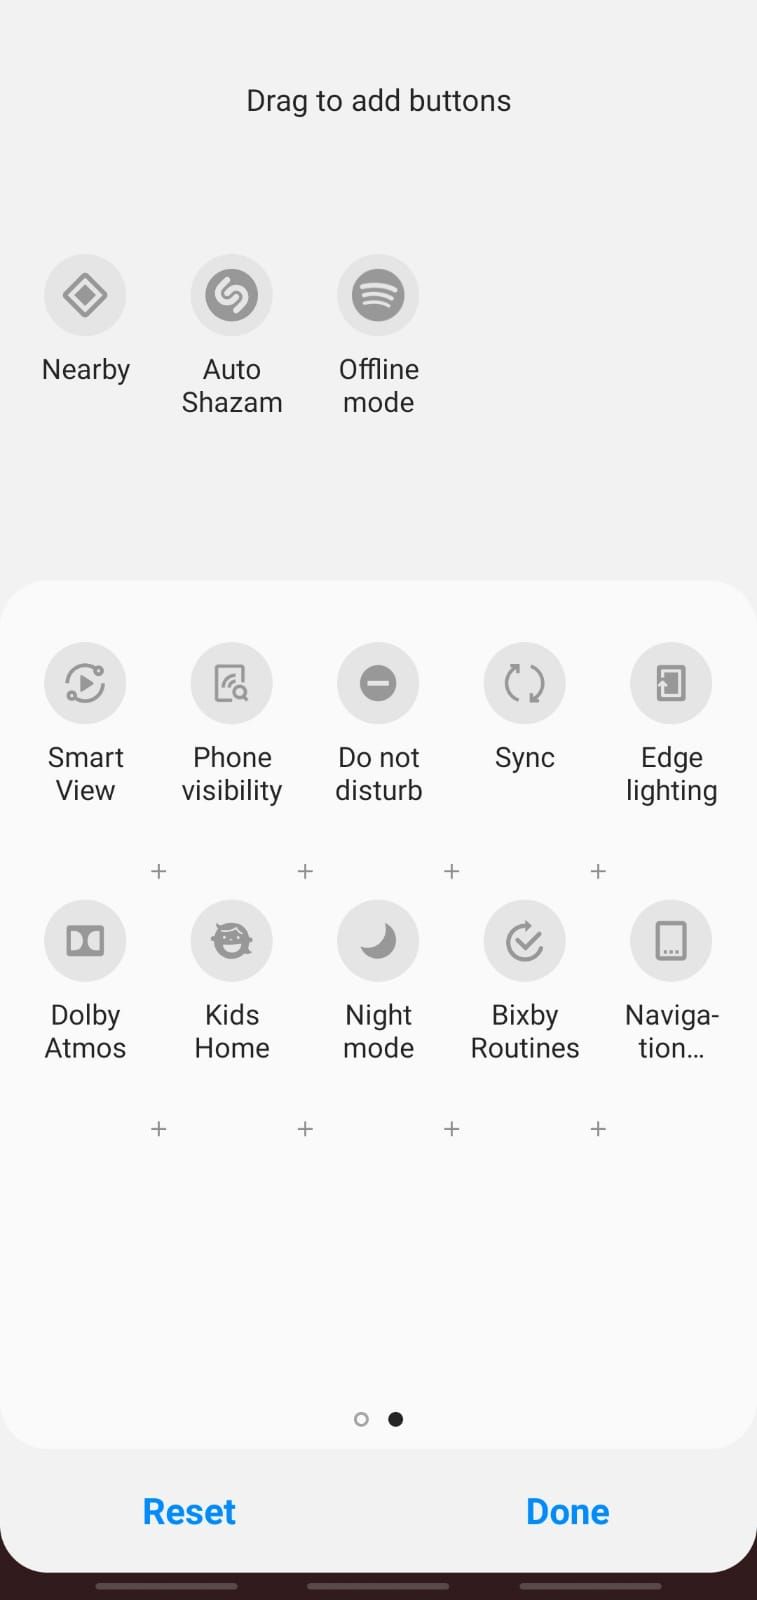 Auto-Rotate(Portrait button) option missing from Samsung galaxy s10 -  Samsung Community